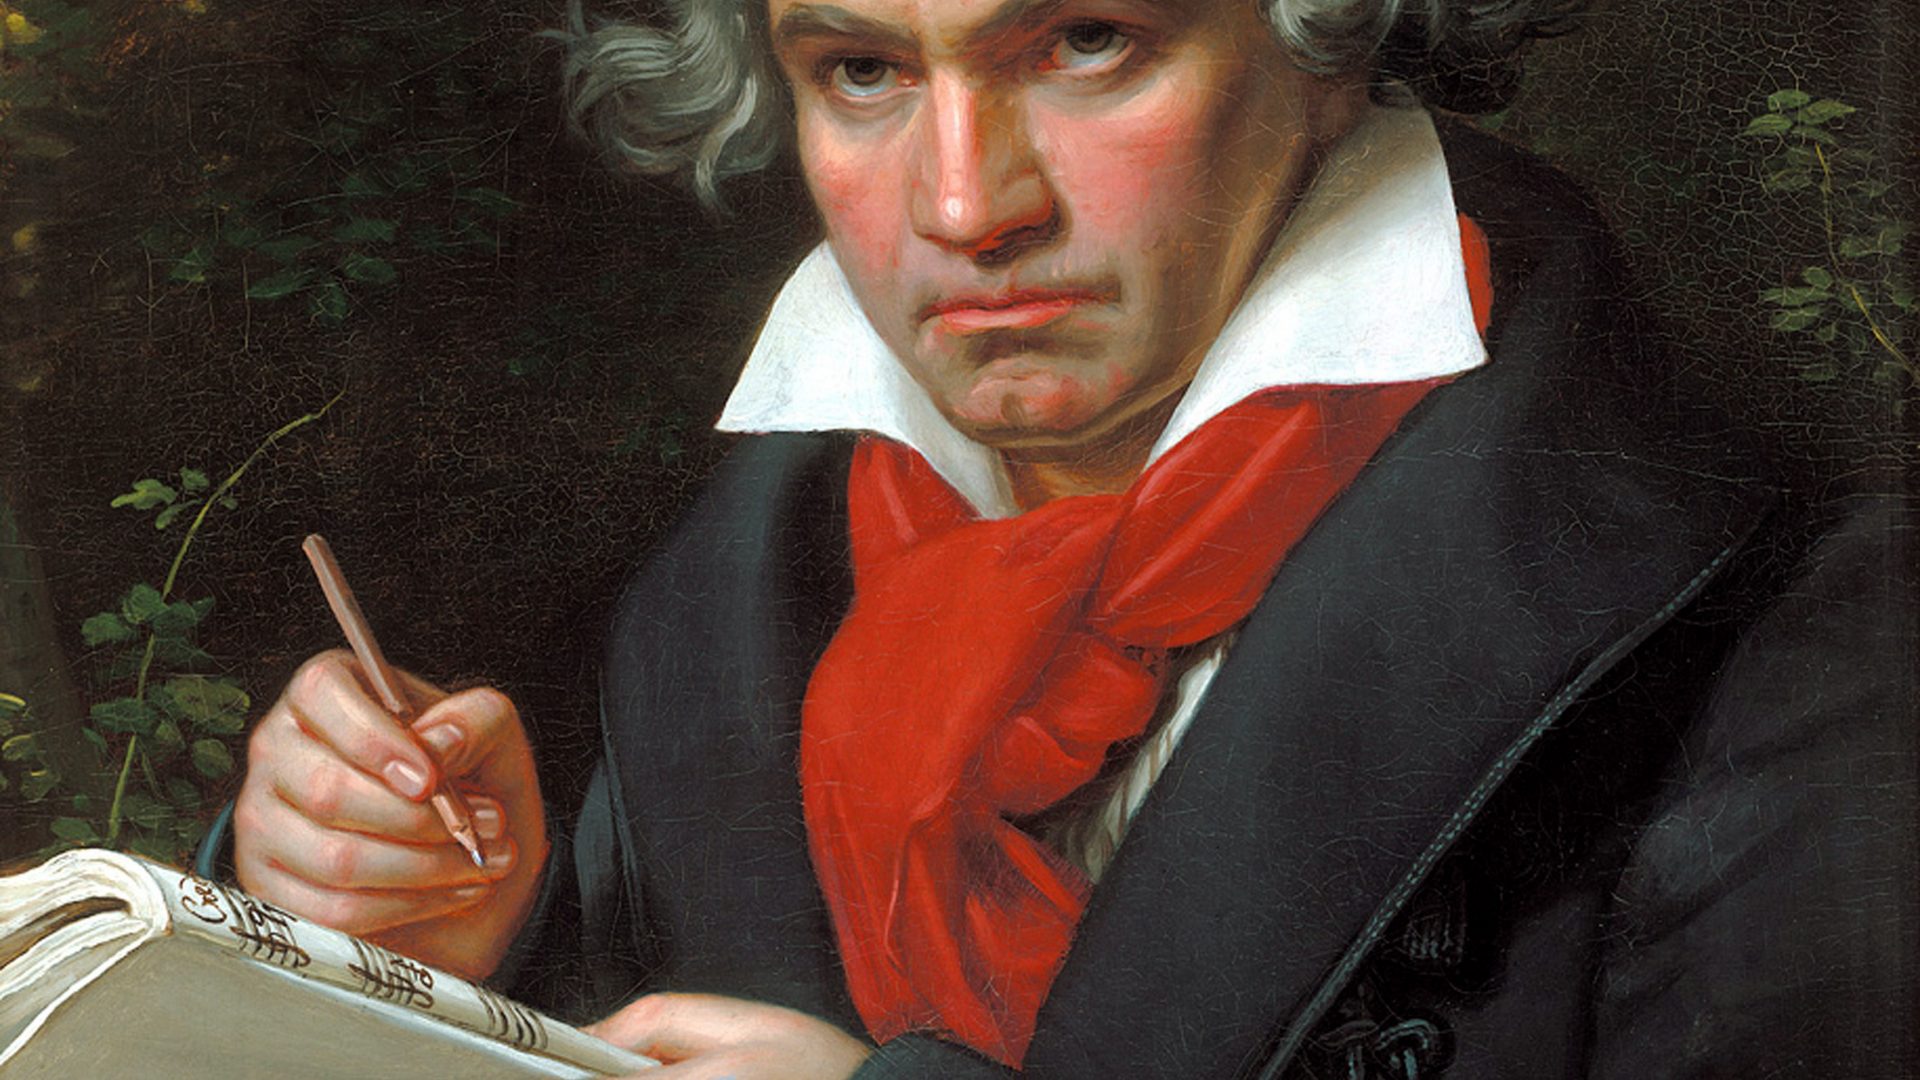 Image of Beethoven, composers